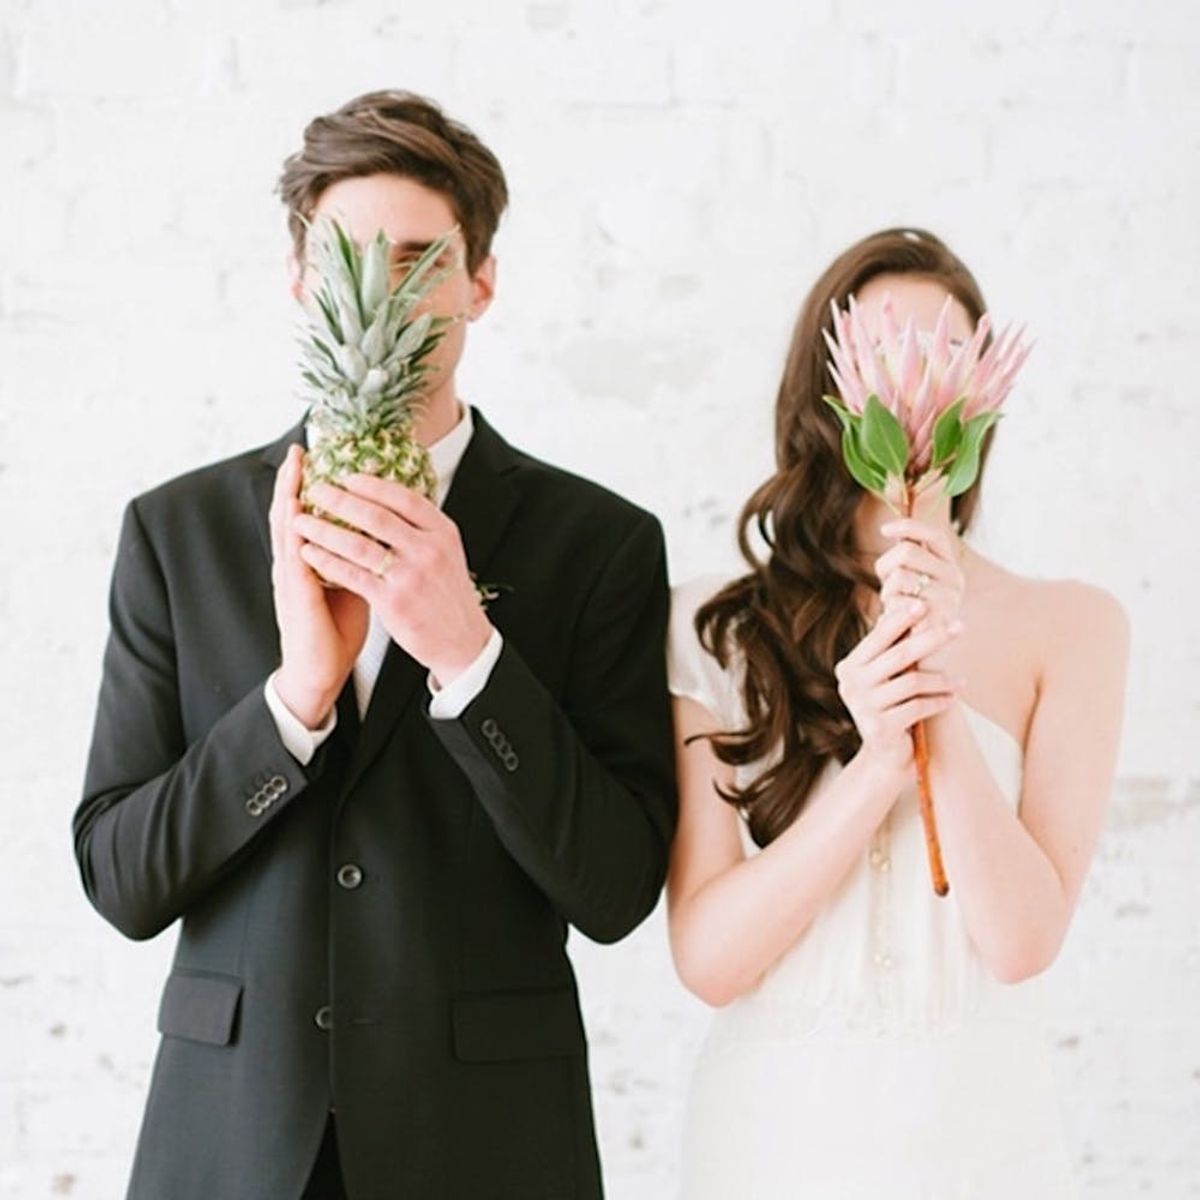 15 Unique Ways to Plan a Tropical-Themed Wedding